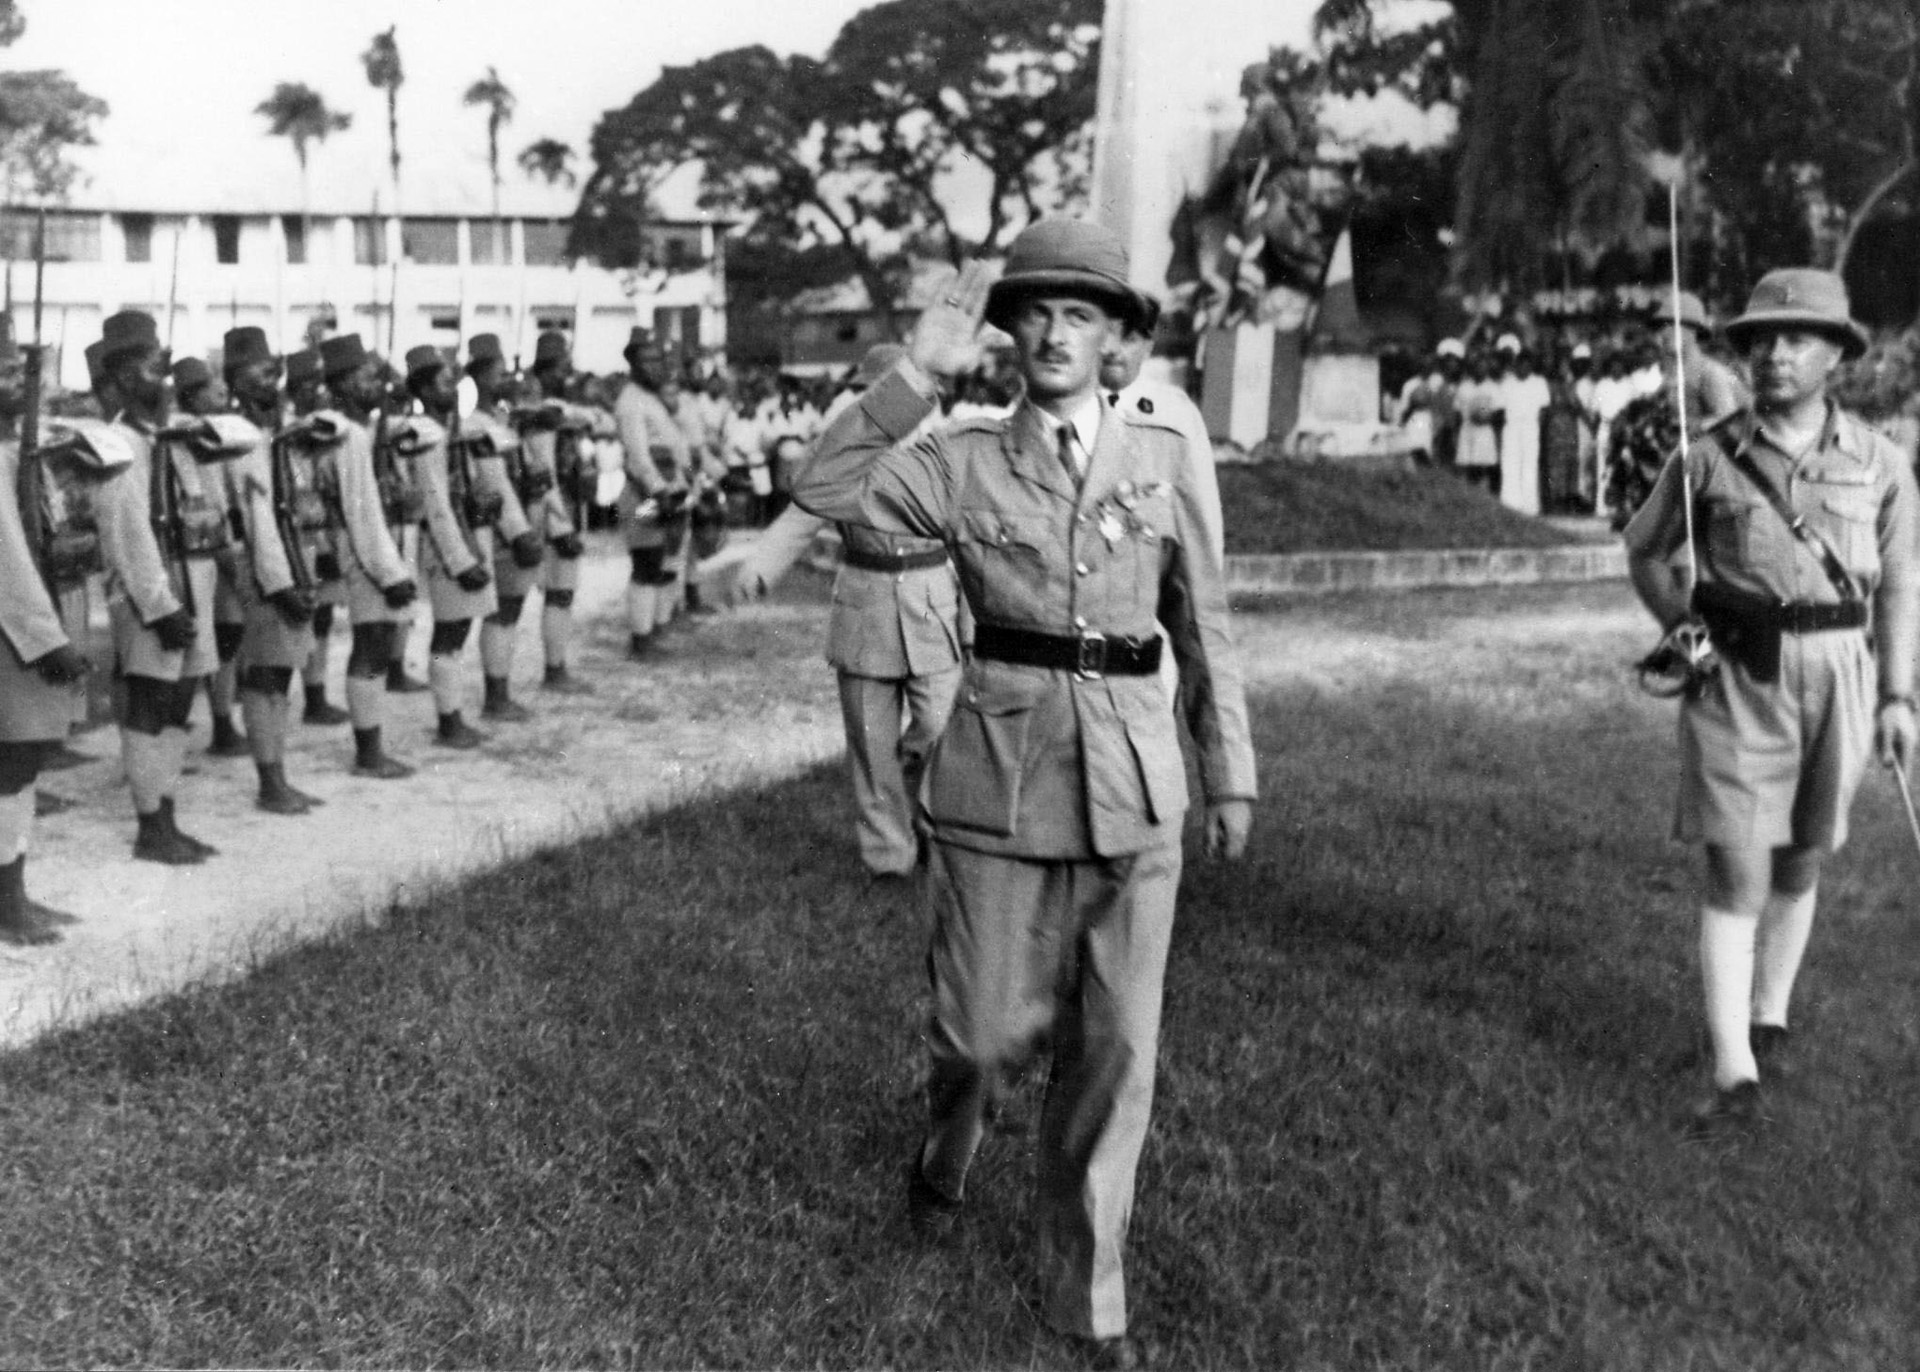 Then-Colonel Philippe Leclerc, one of Free France’s top field commanders, reviews French Senegalese troops in Chad, December 1940. The Free French army depended a great deal on colonial troops. 